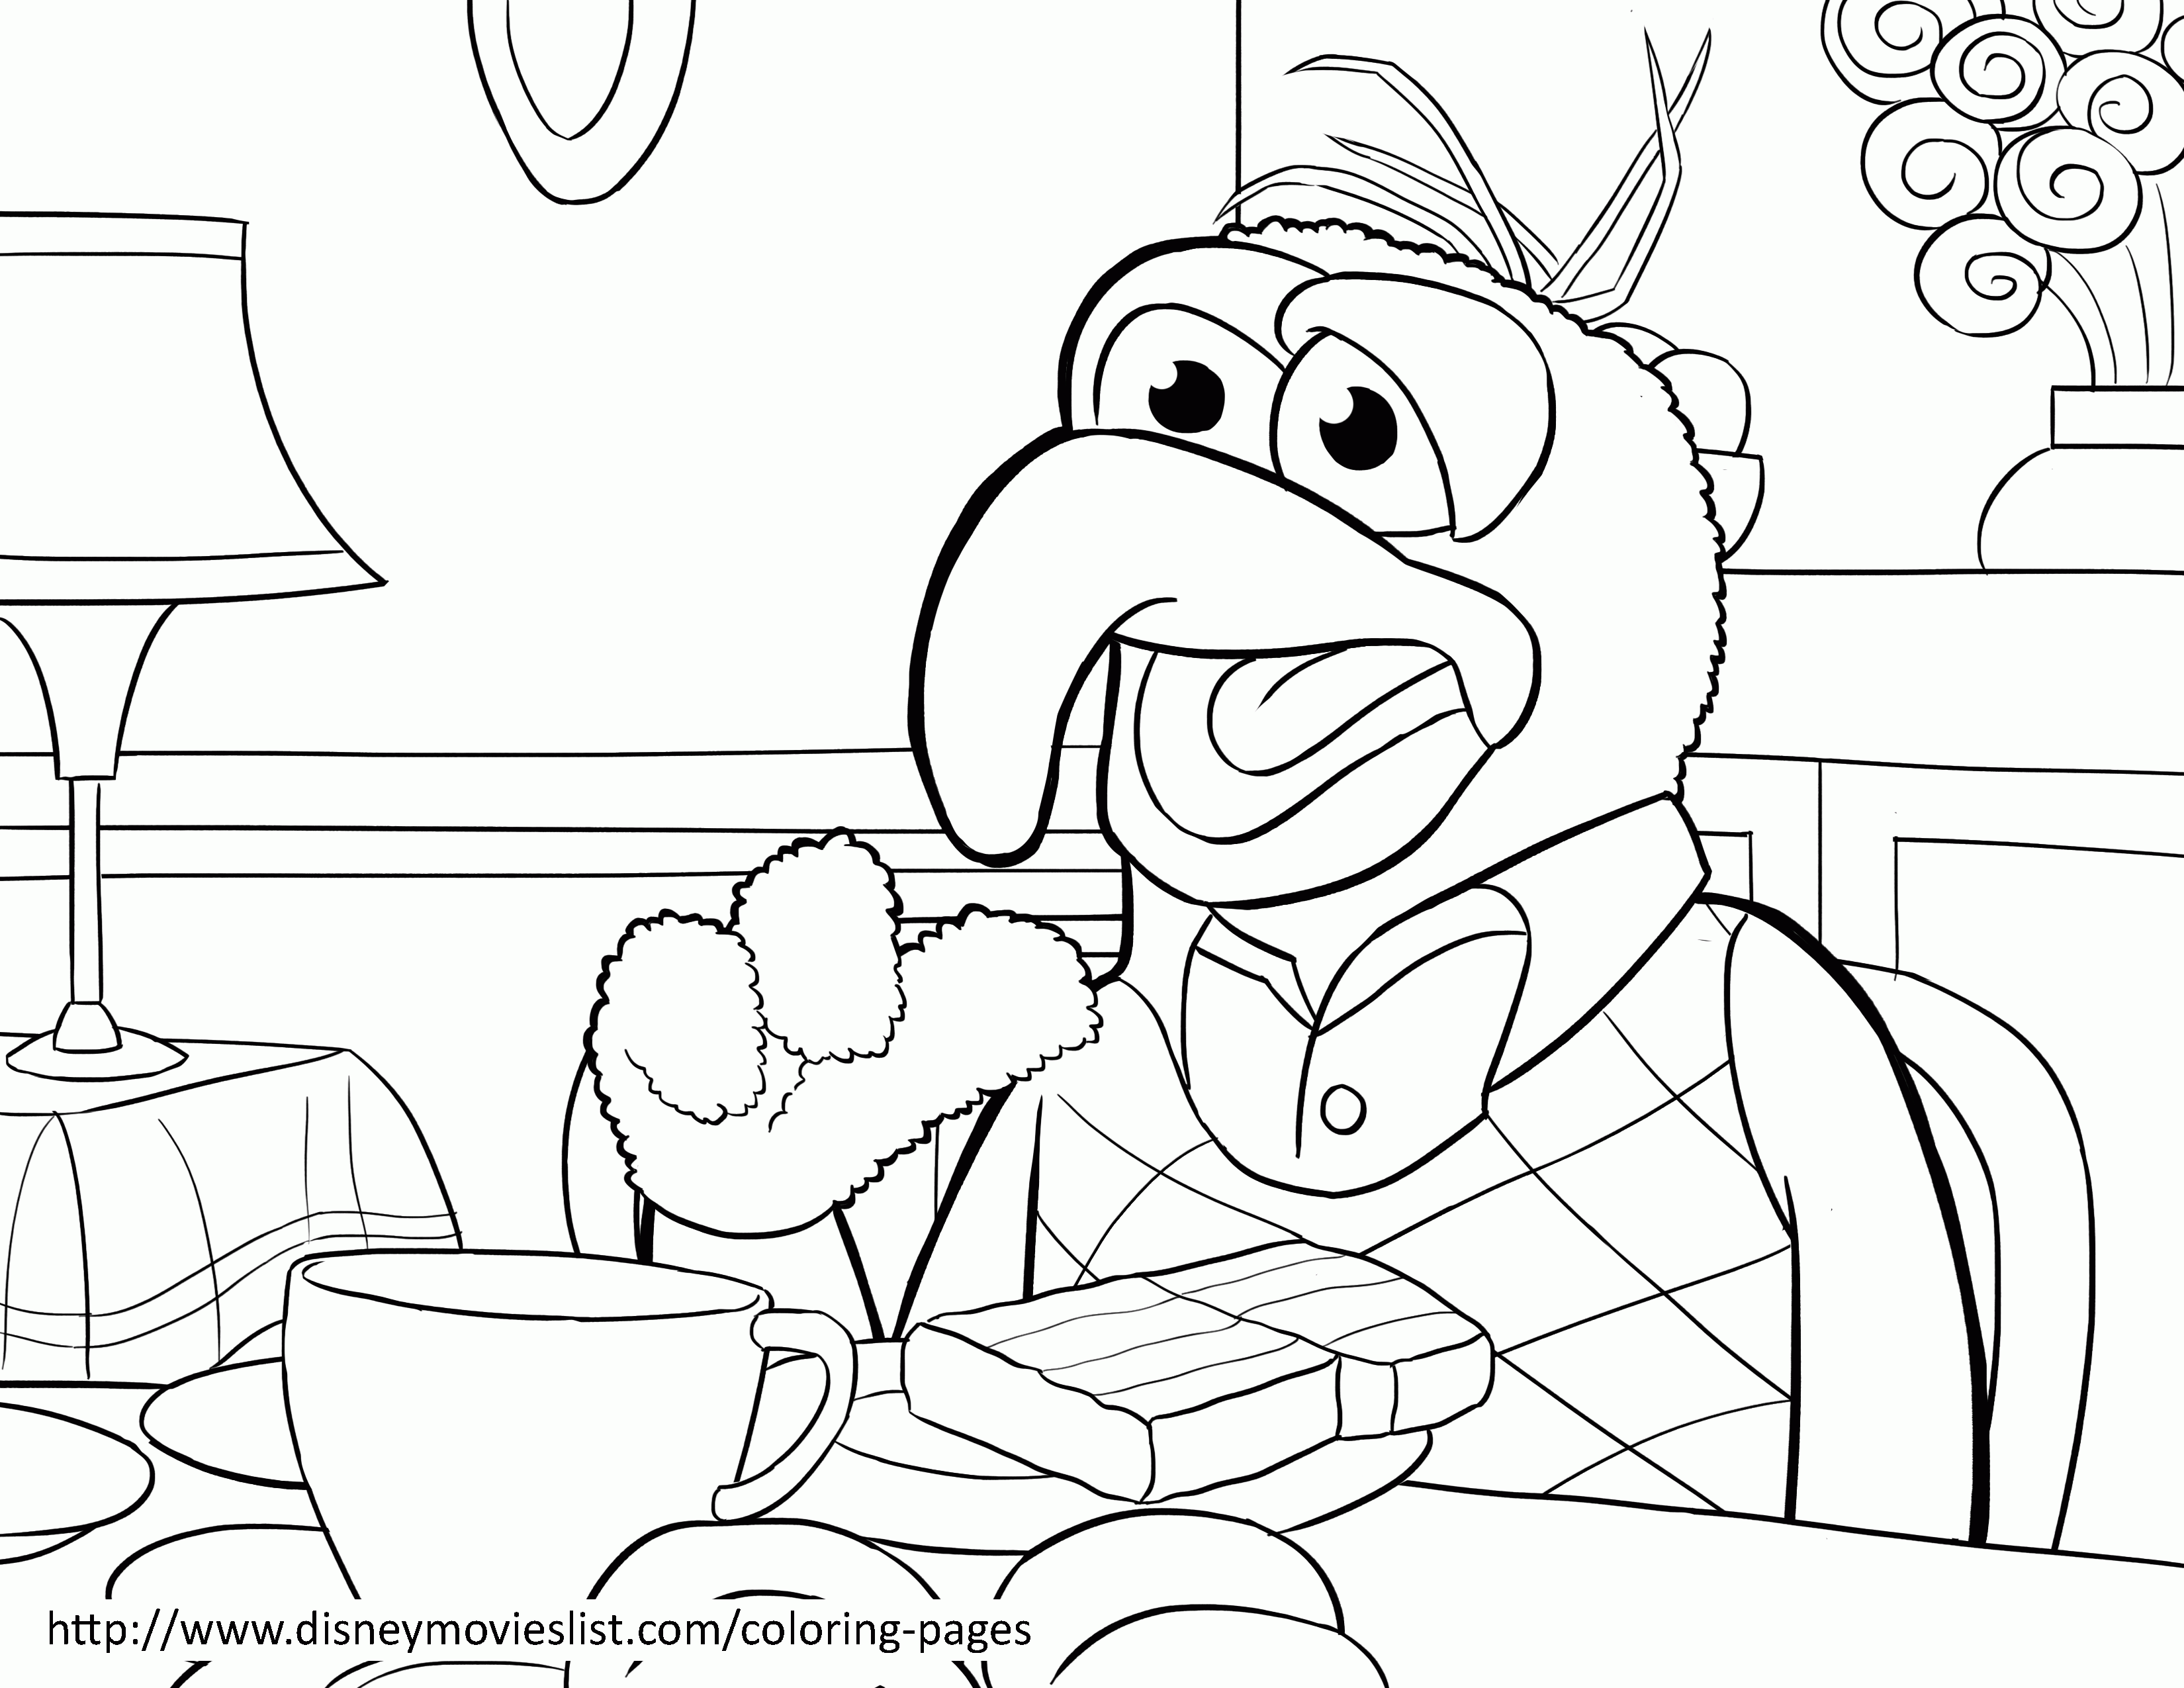 19 Gonzo Muppet Coloring Pages - Printable Coloring Pages